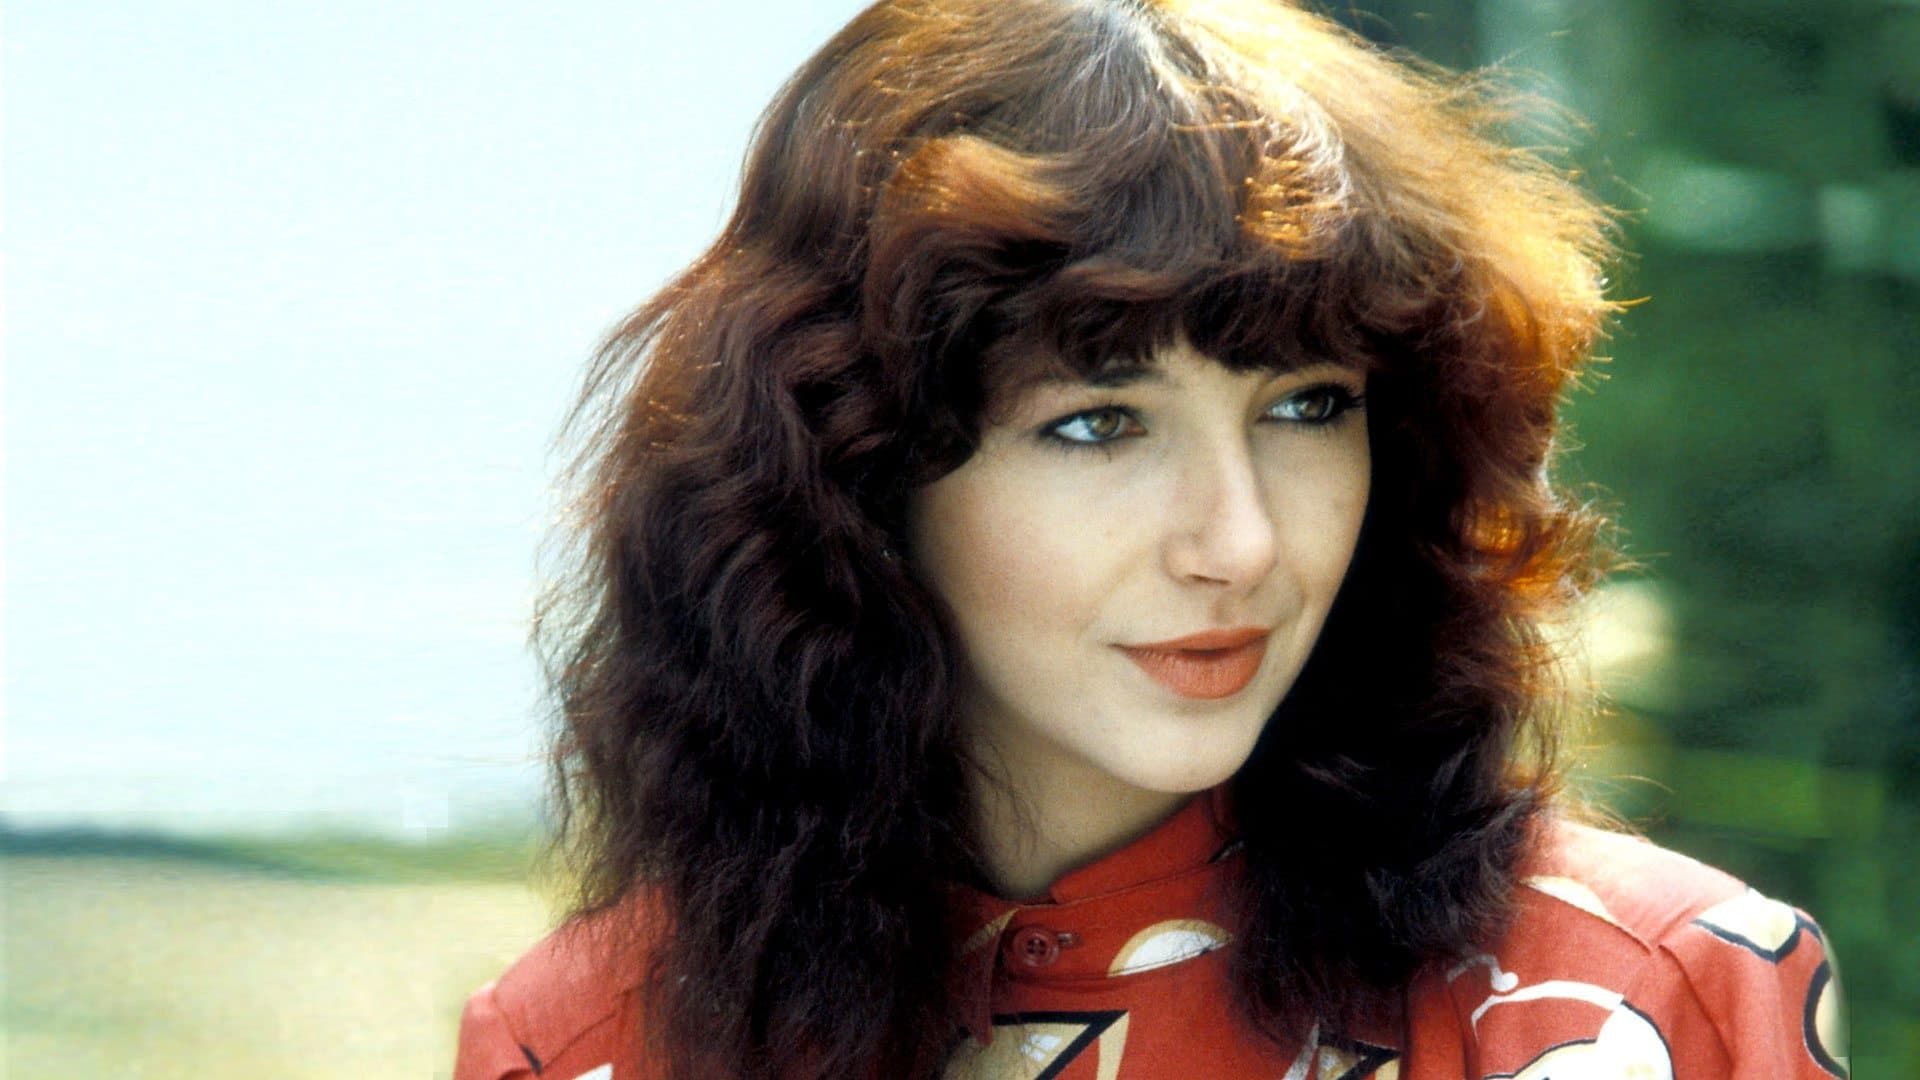 Kate Bush at the BBC background